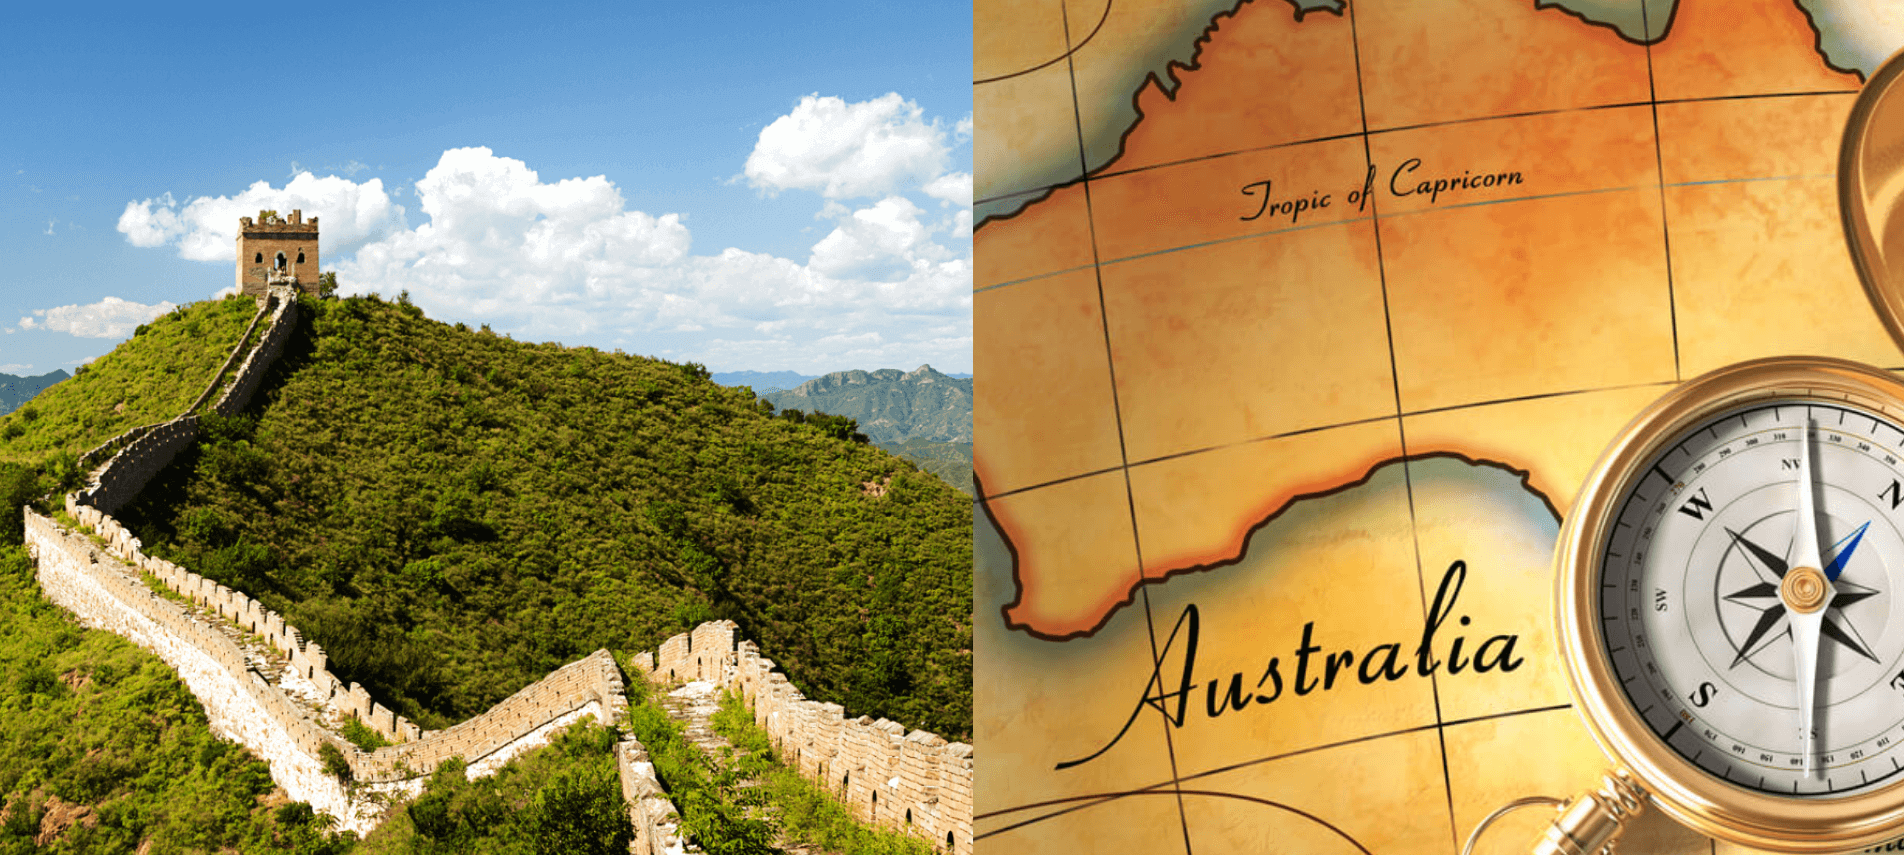 Flight deals from Warsaw, Poland to both Beijing, China and Australia | Secret Flying